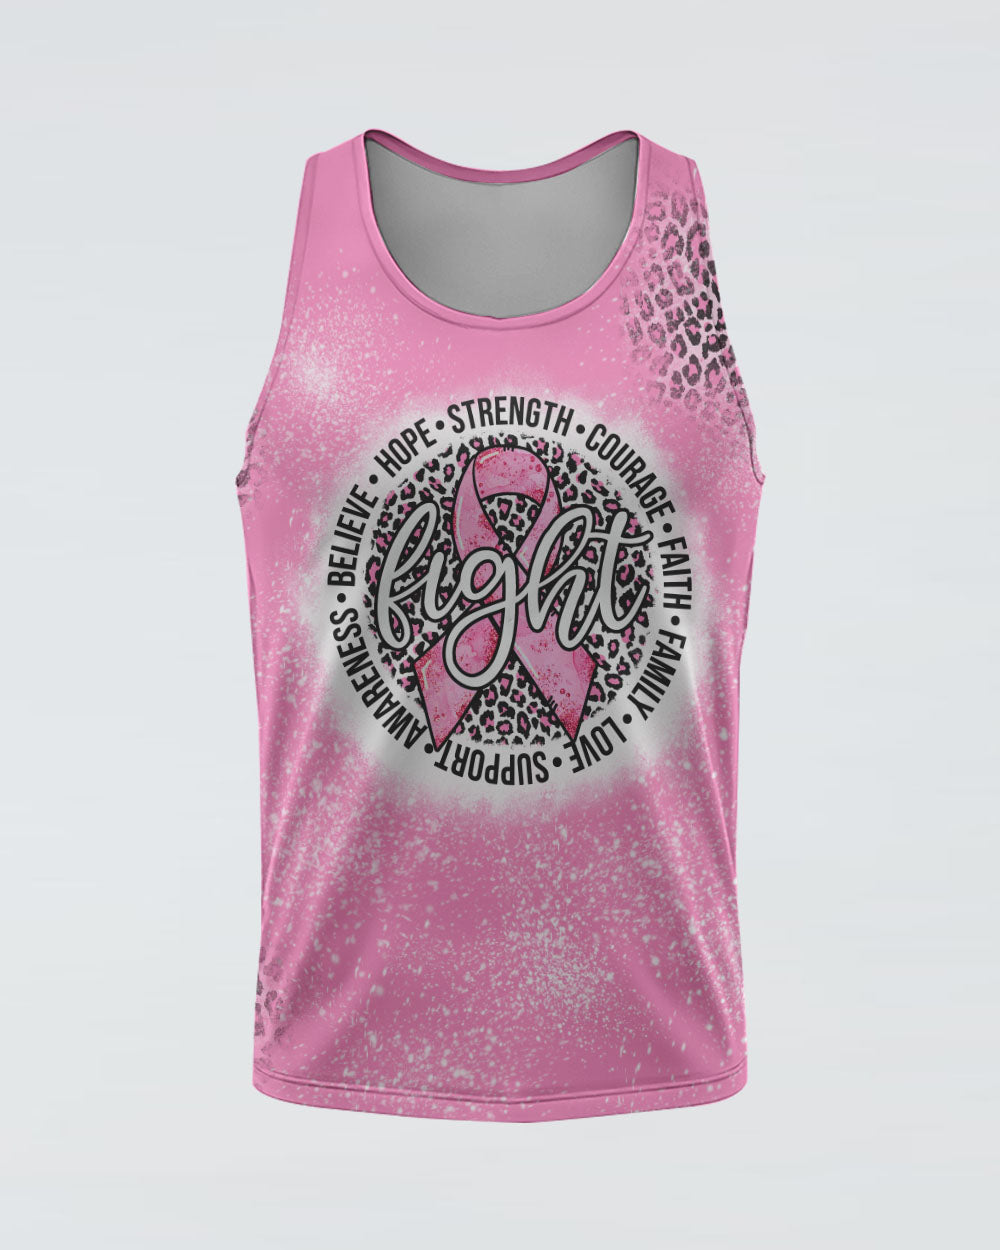 Fight Cancer Ribbon Circle Women's Breast Cancer Awareness Tanks